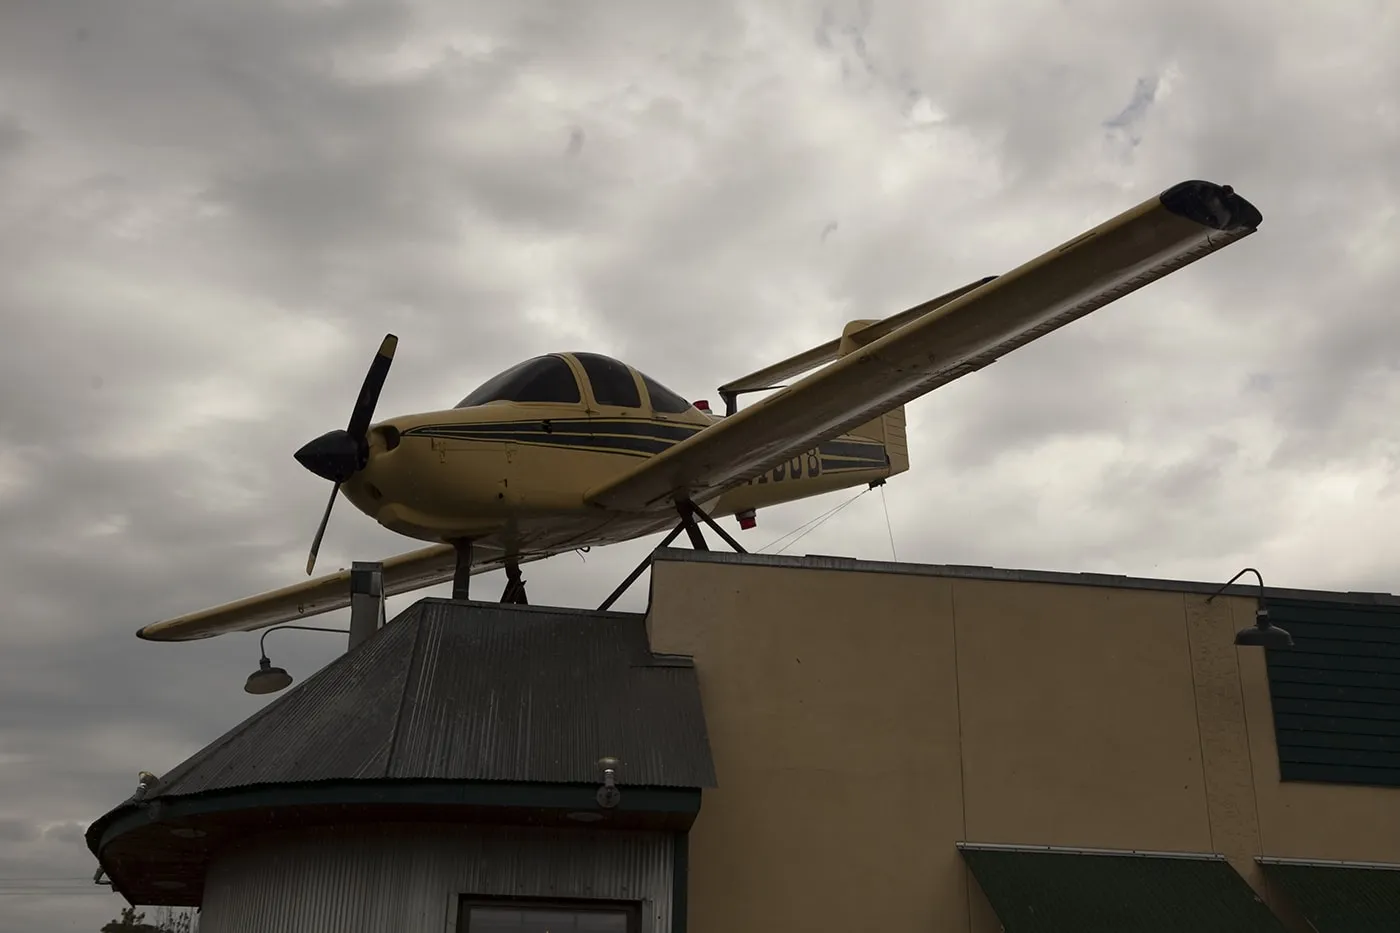 Airplane on a Restaurant's Roof at Habanero's Mexican Restaurant in Lee's Summit, Missouri.